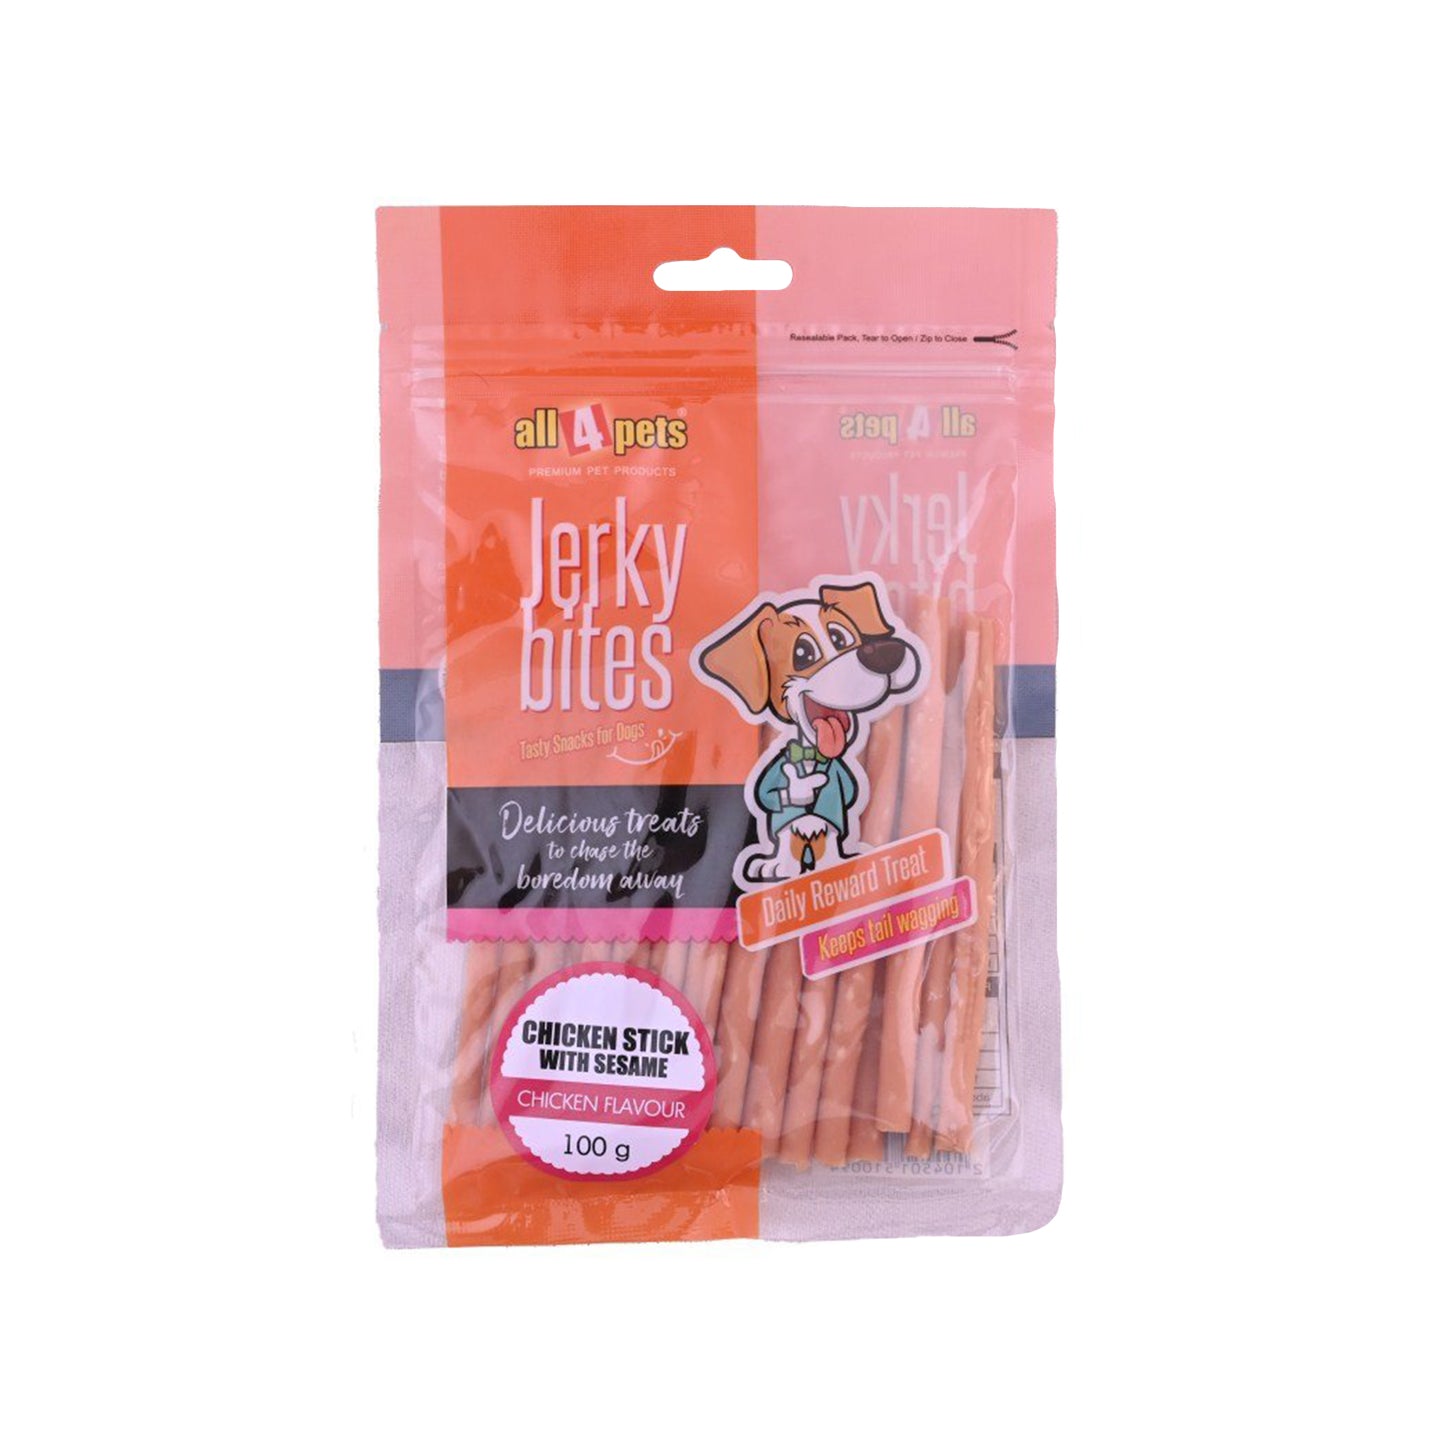 All4pets - Jerky Bites | Chicken Stick with Sesame For Dogs